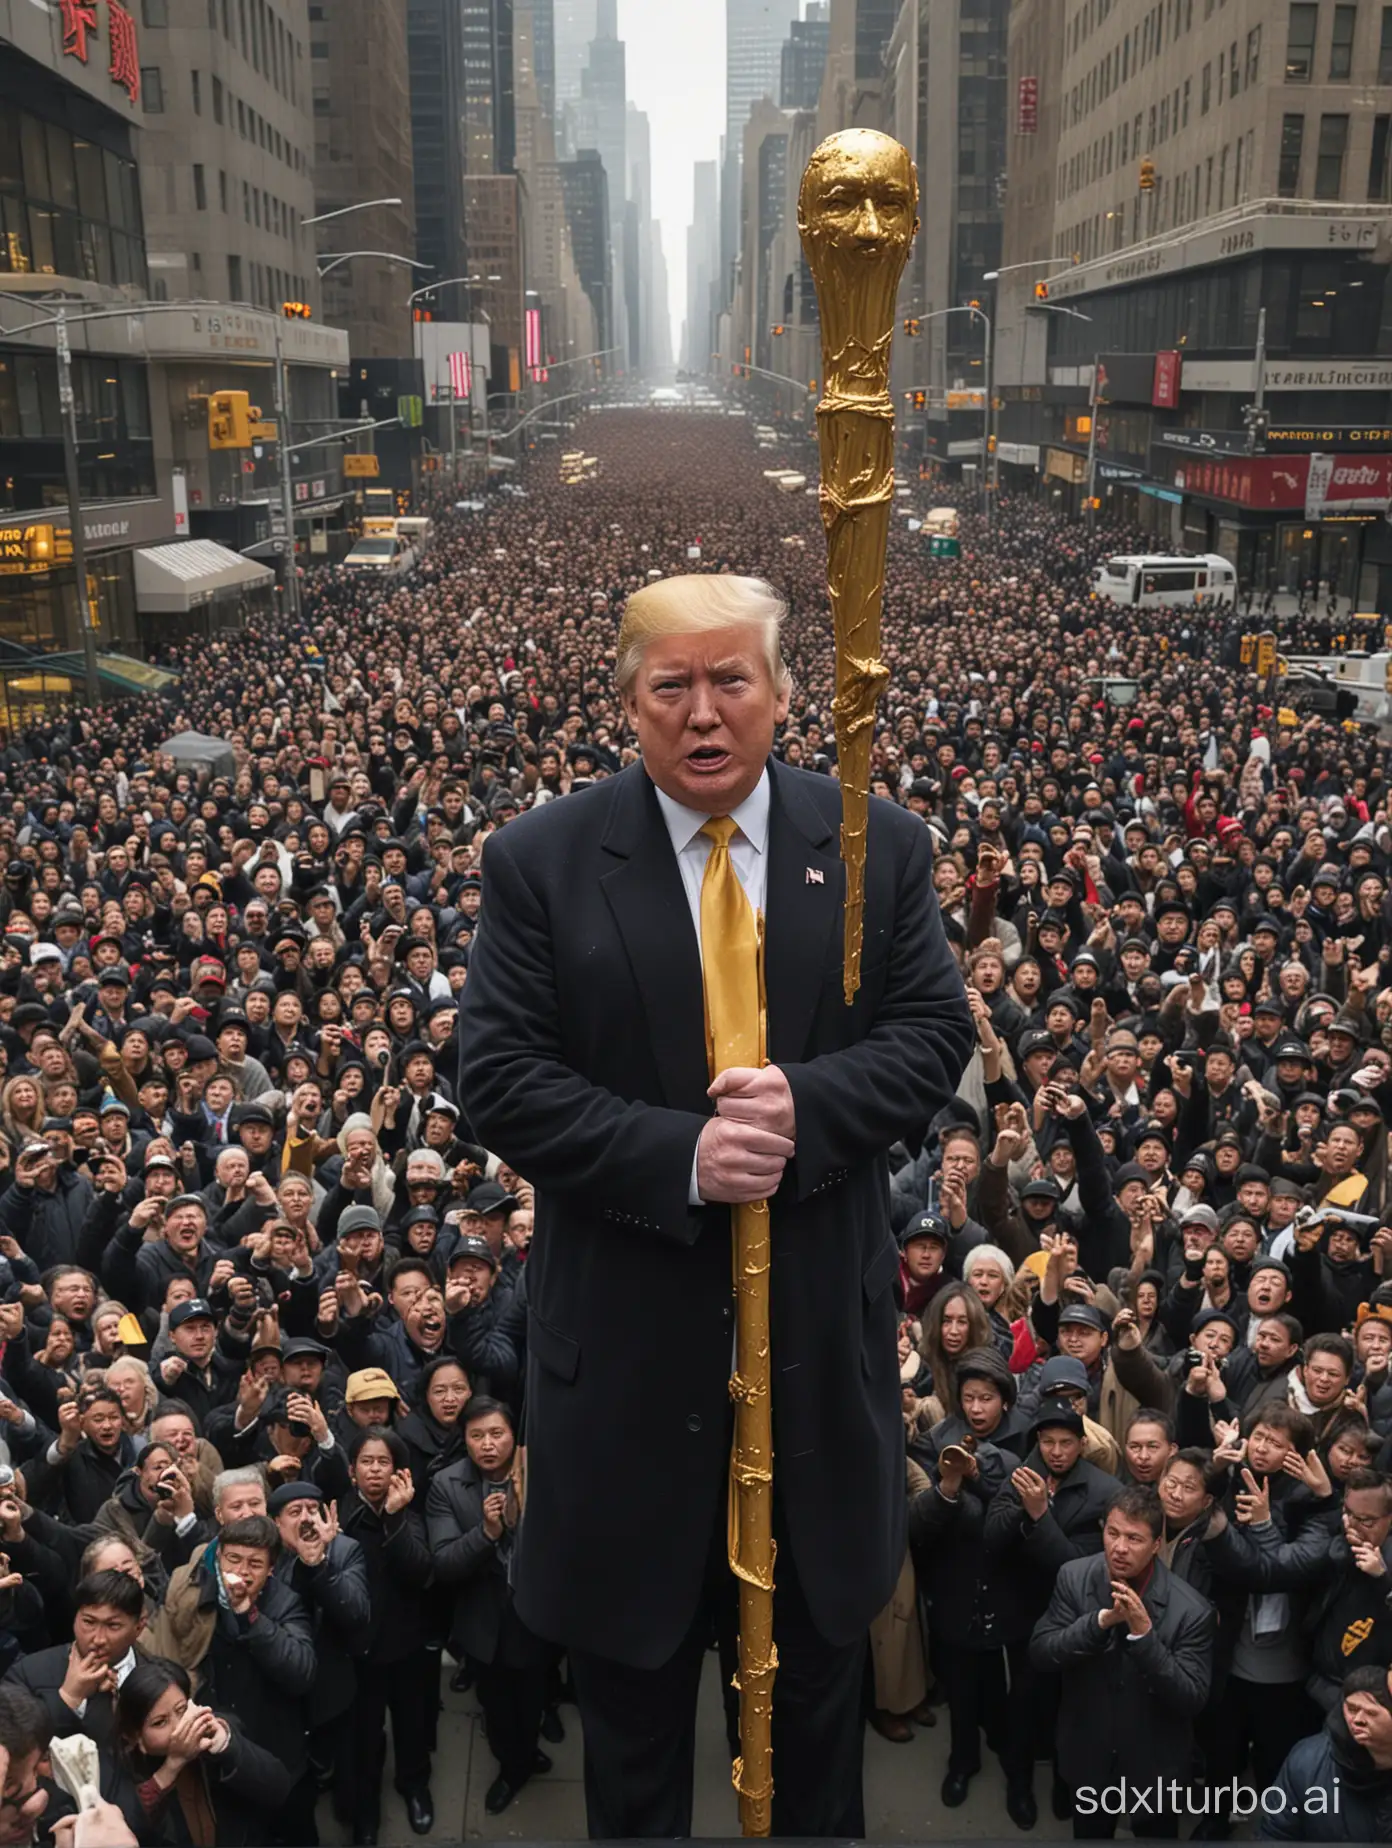 The bruised and swollen Trump, twenty zhang tall, holding the 108,000-catty Golden Cudgel, stands above New York, looking down at the panicked crowds in the city.